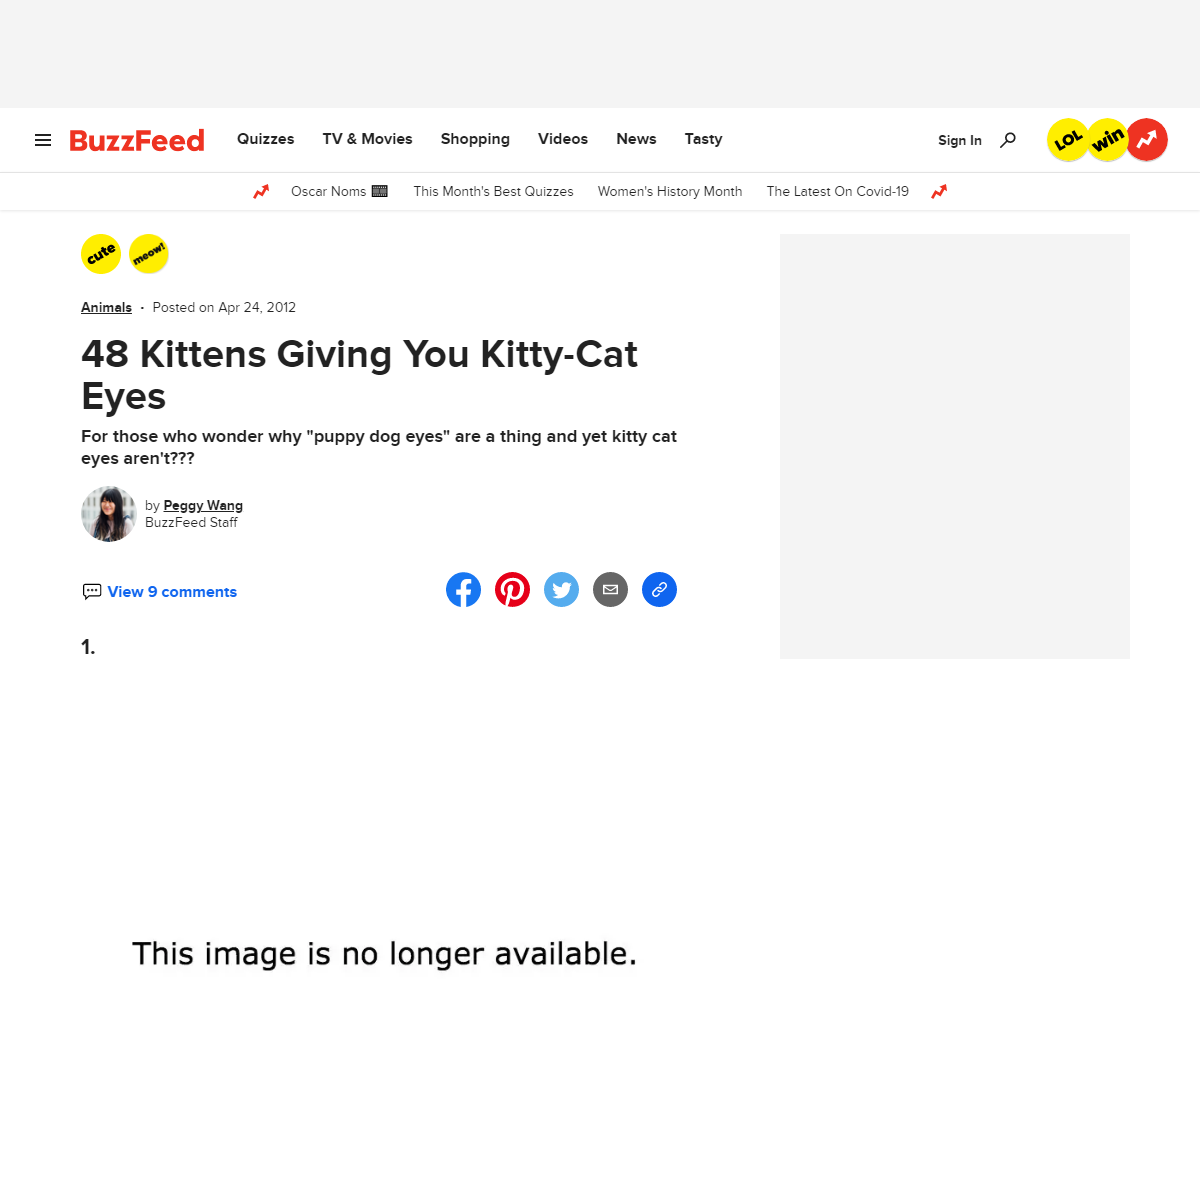 A complete backup of https://www.buzzfeed.com/peggy/50-kittens-giving-you-kitty-cat-eyes